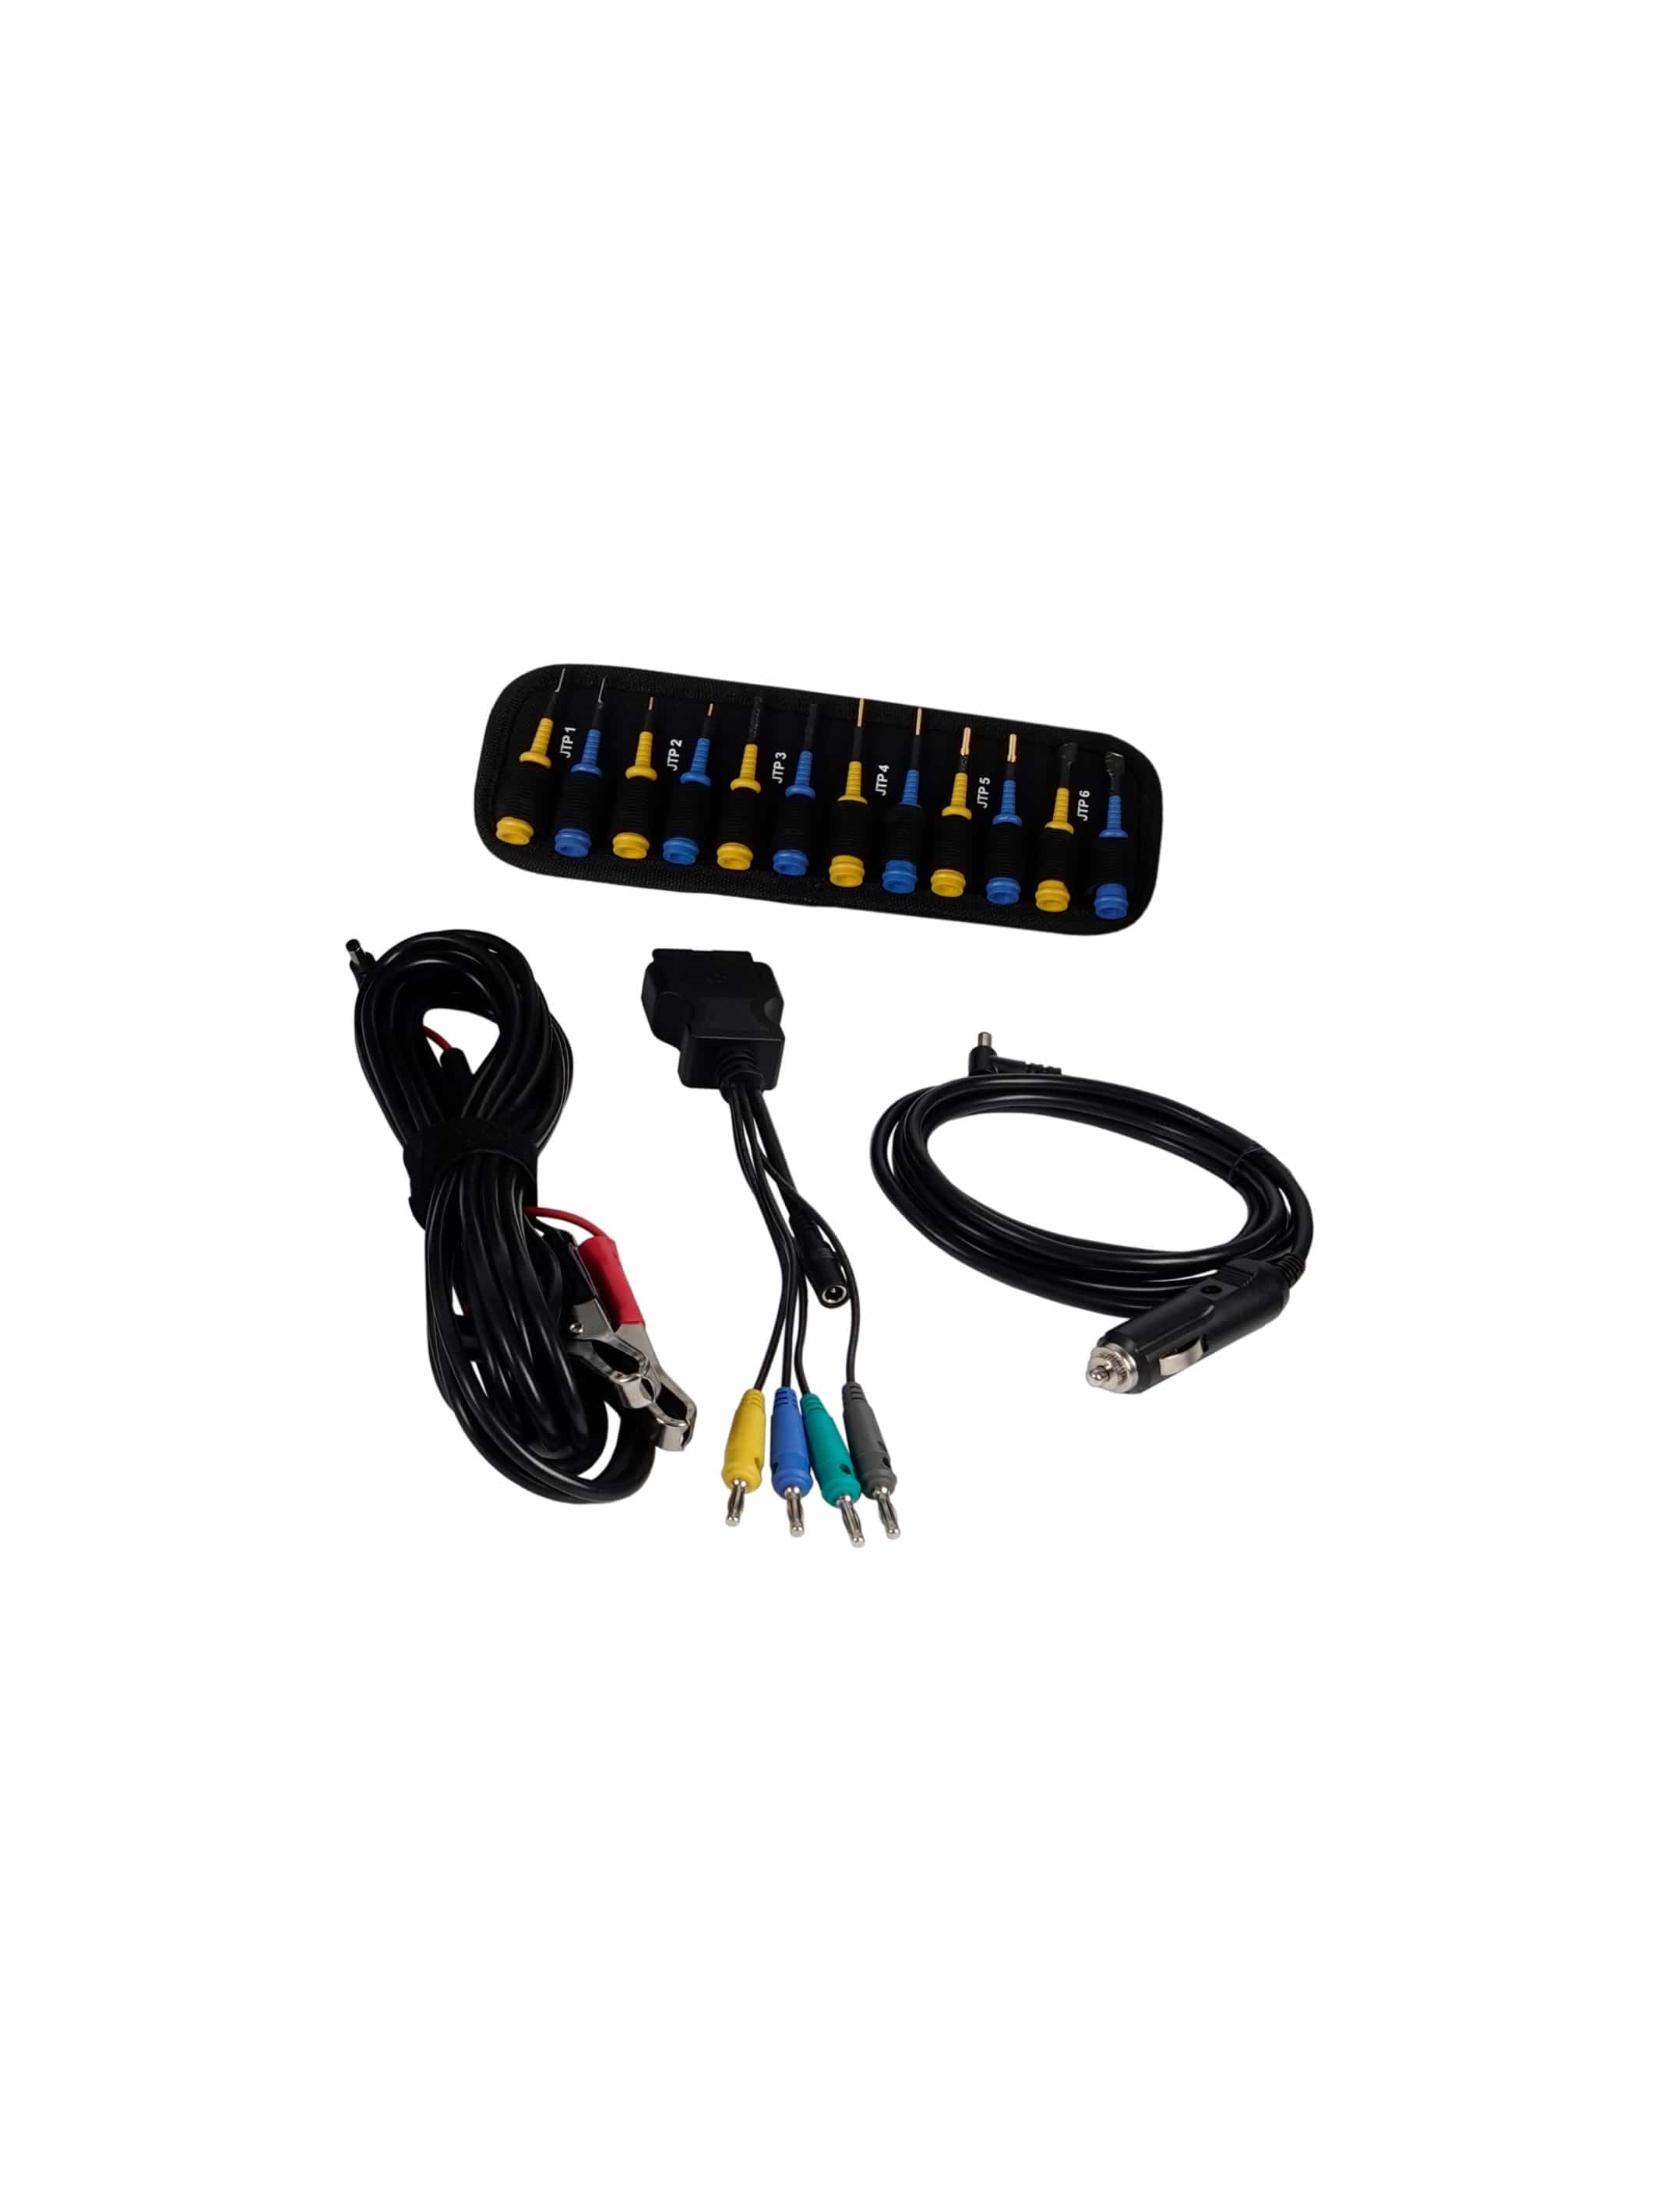 70002001 Multipin Kit - Jaltest Deluxe Diagnostic Computer Commercial Vehicle, Construction & Agriculture Equipment Kit